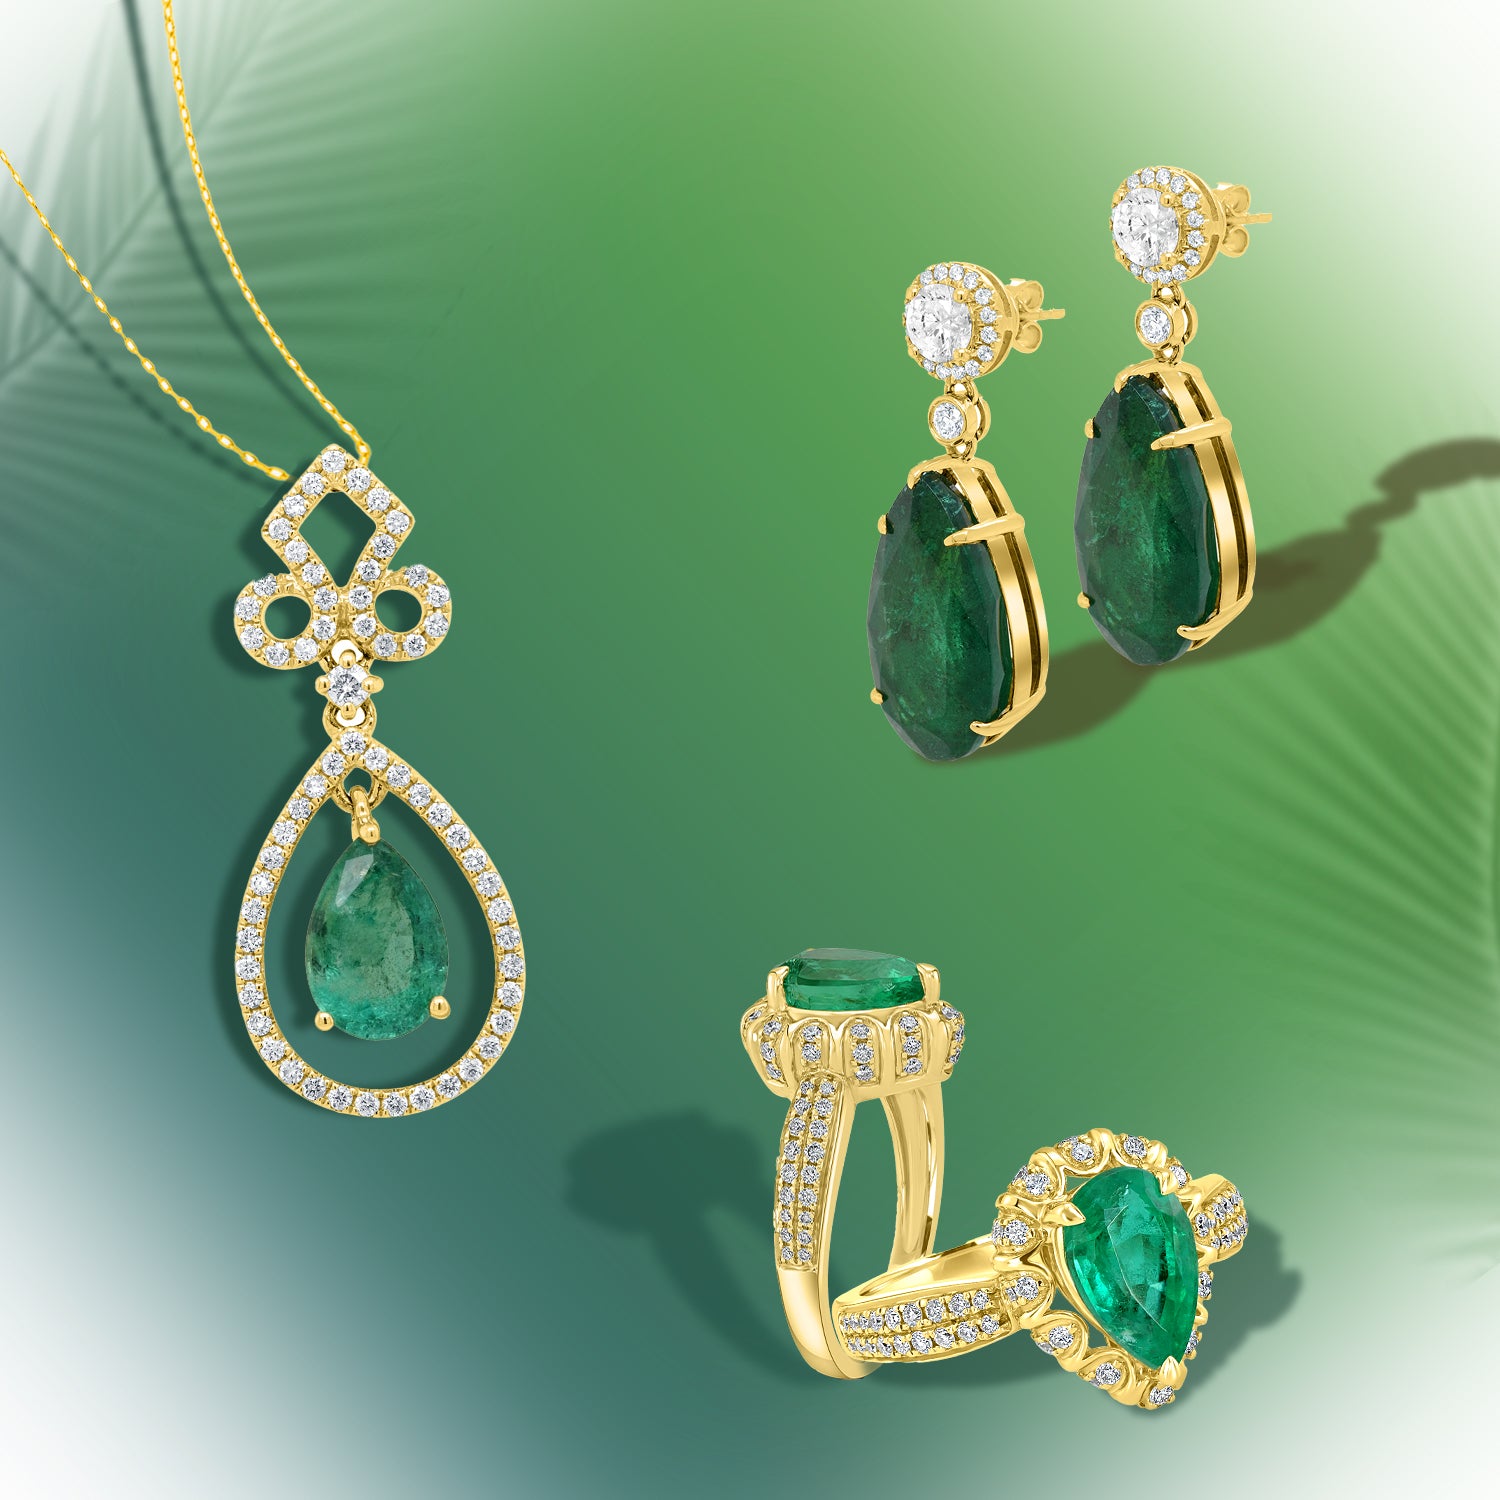 3 Exquisite emerald pieces that make exceptional gifts